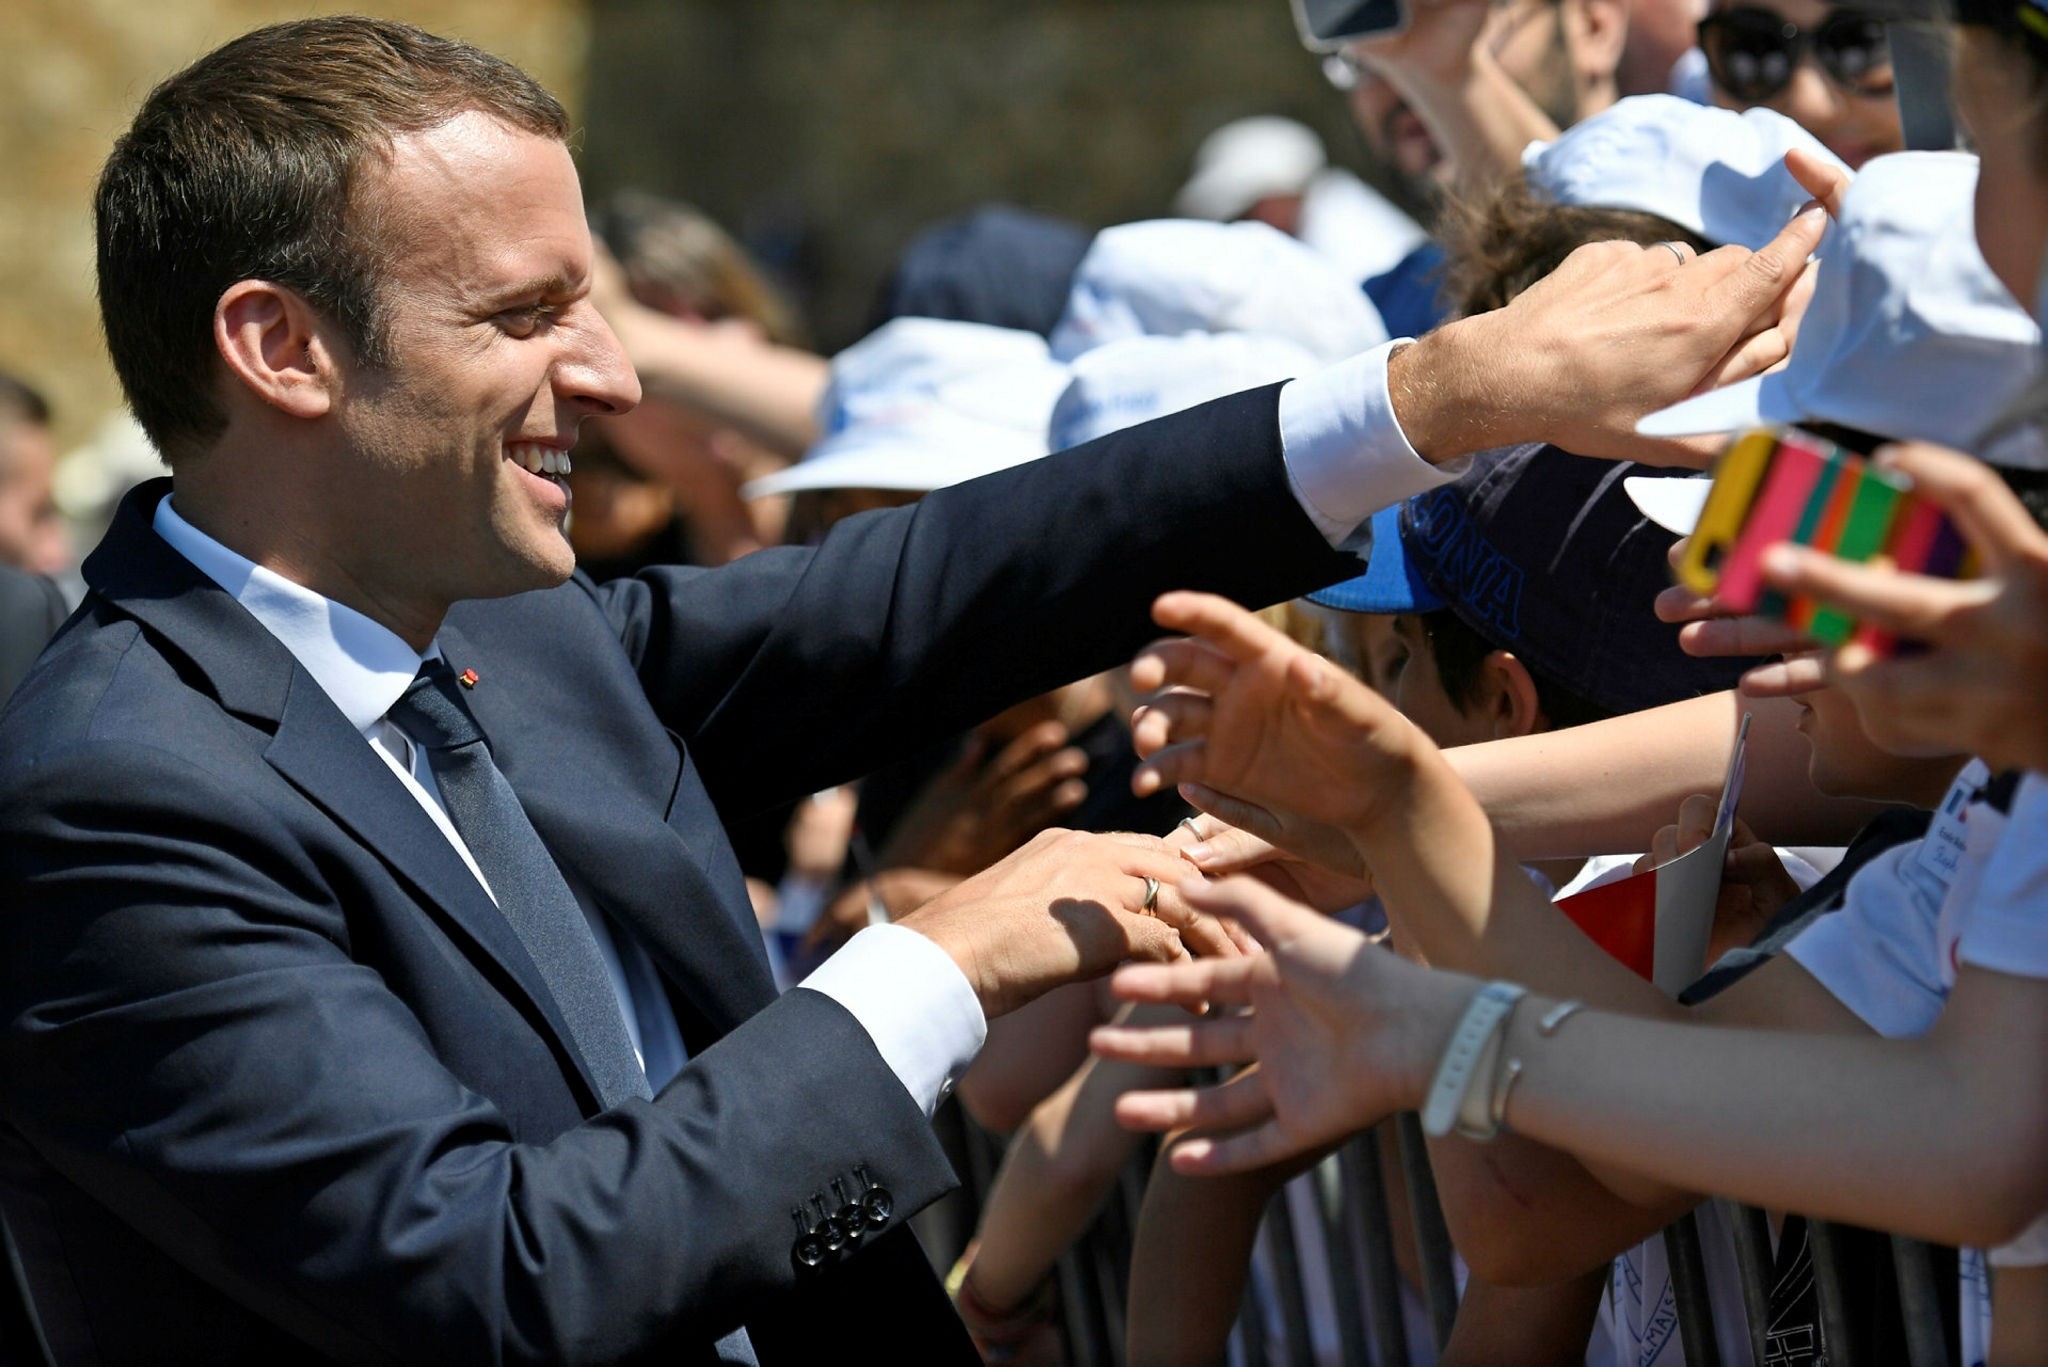 French President Emmanuel Macron shakes hands with people during the ceremony to mark the 77th anniversary of General Charles de Gaulle's appeal of 18 June 1940, at the Mont Valerien memorial in Suresnes, near Paris, France, (EPA Photo)